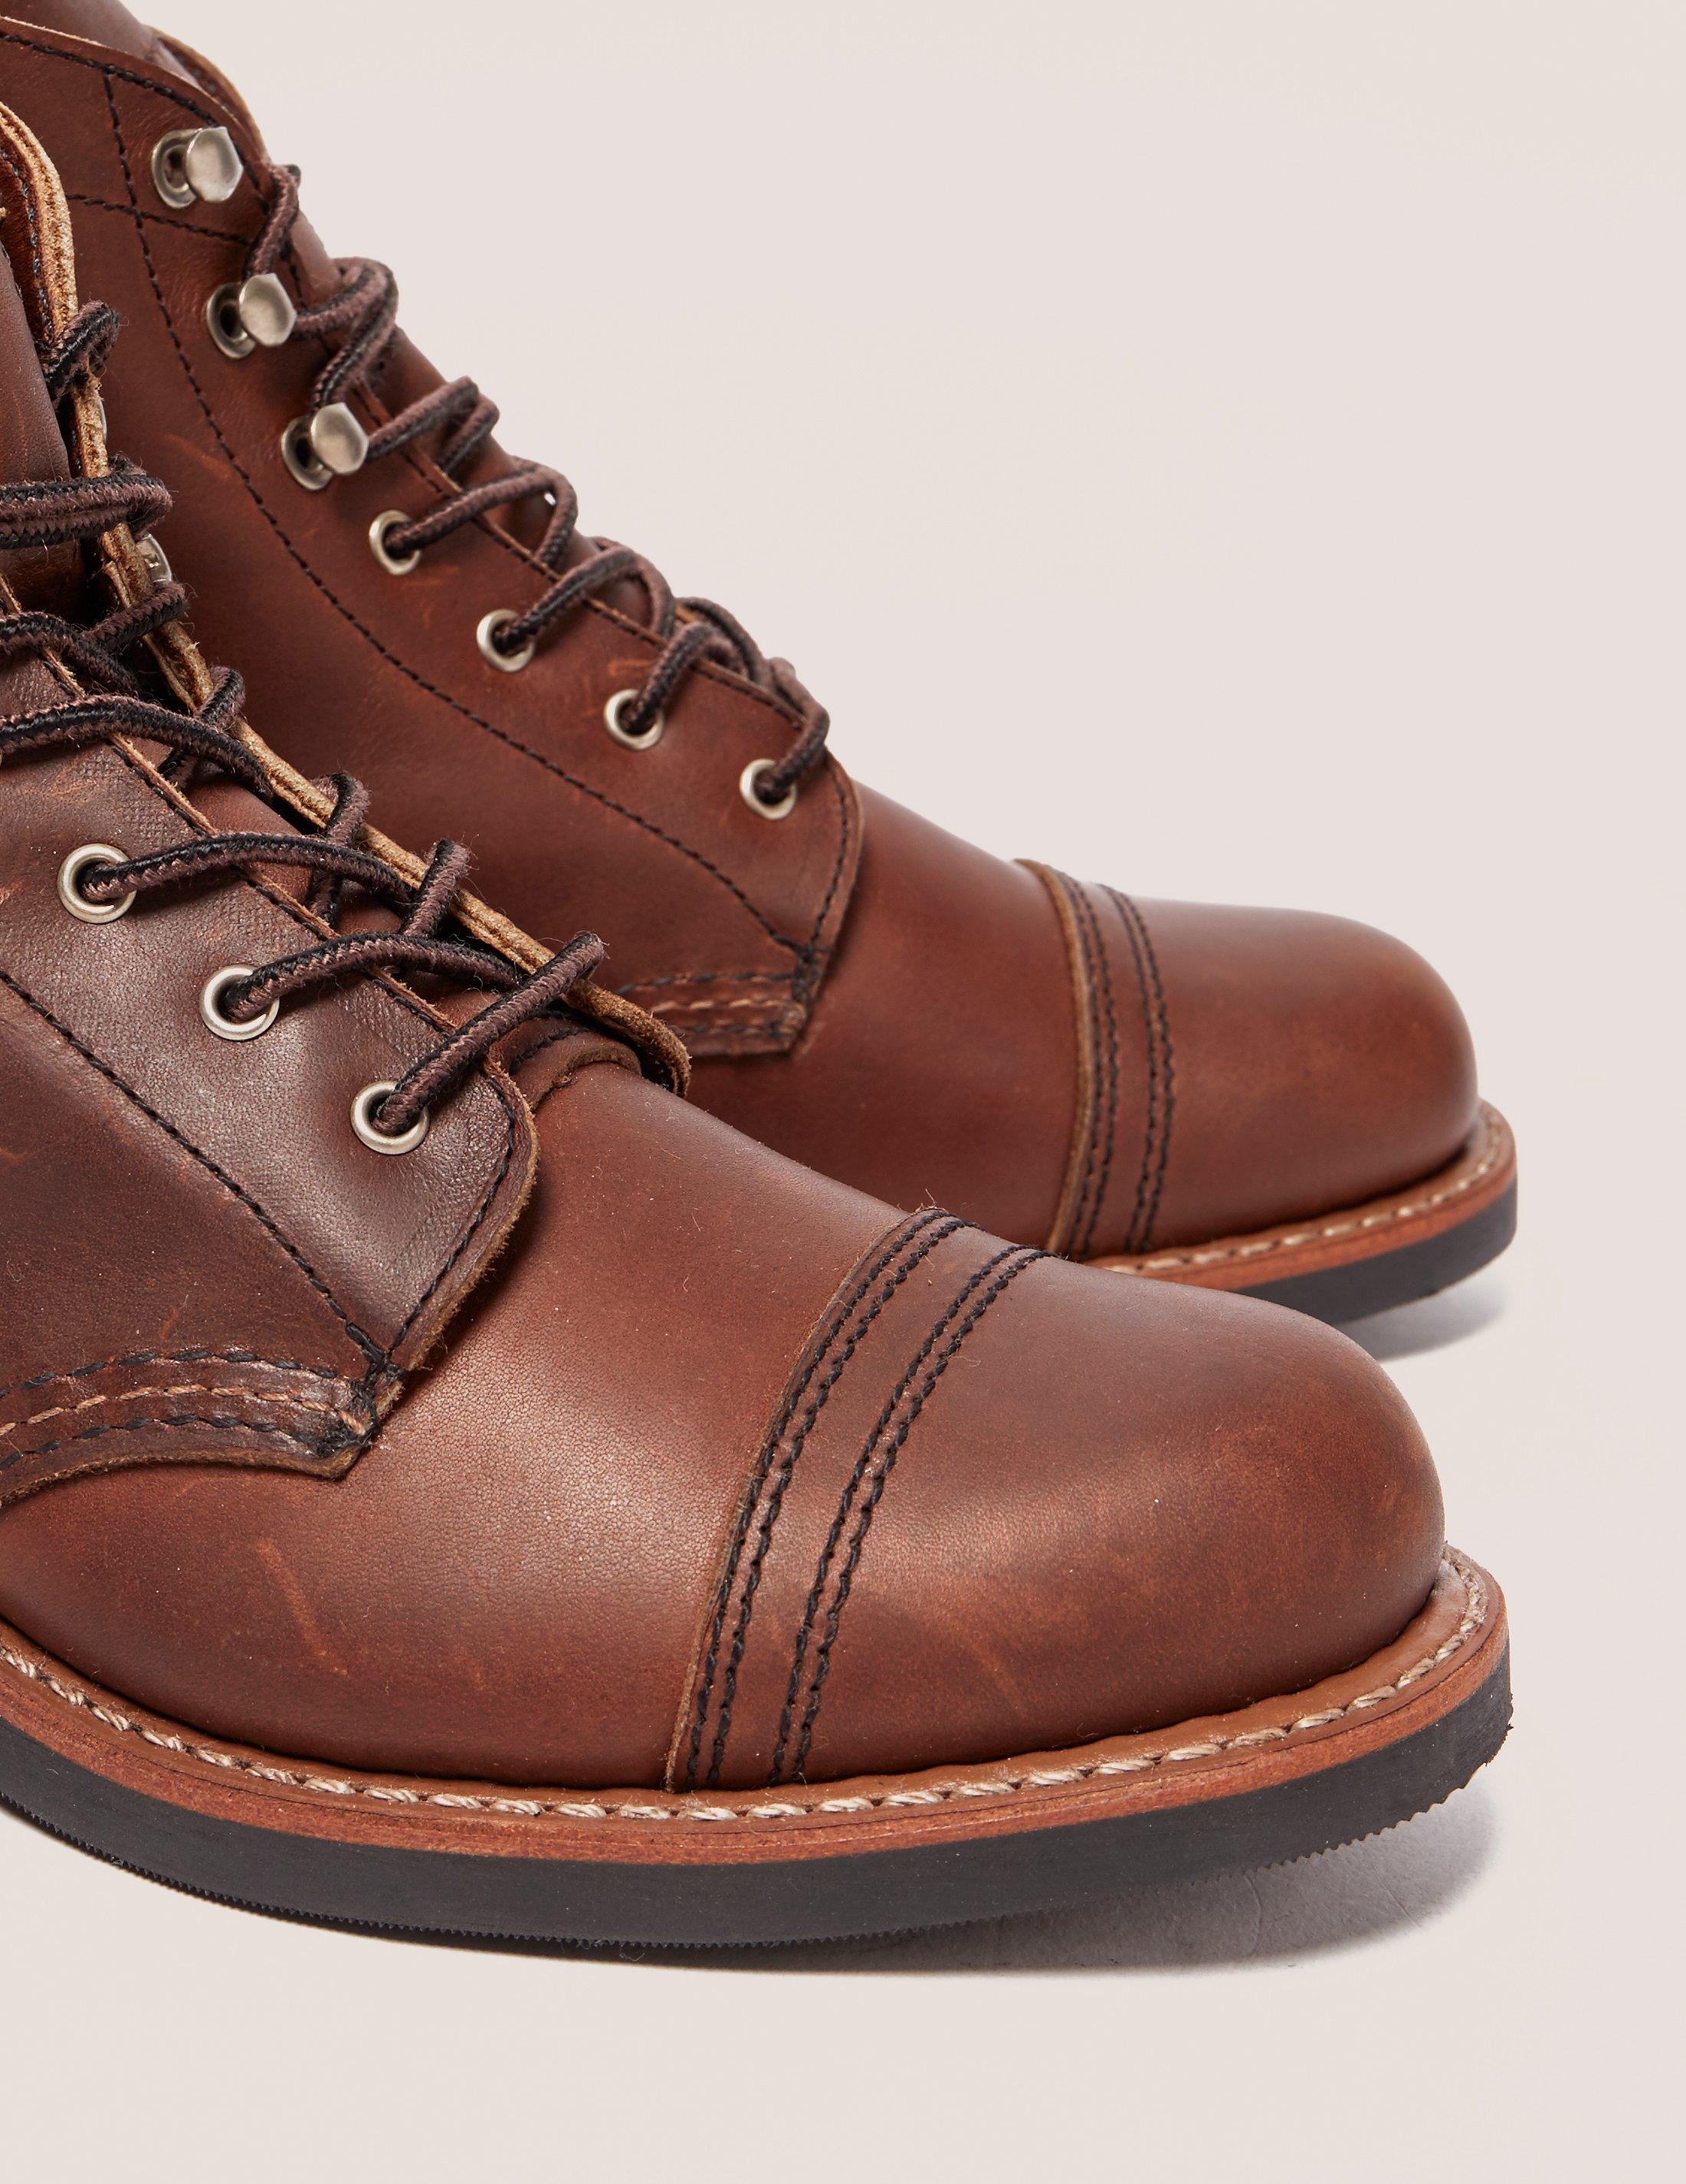 red wing boots kanye